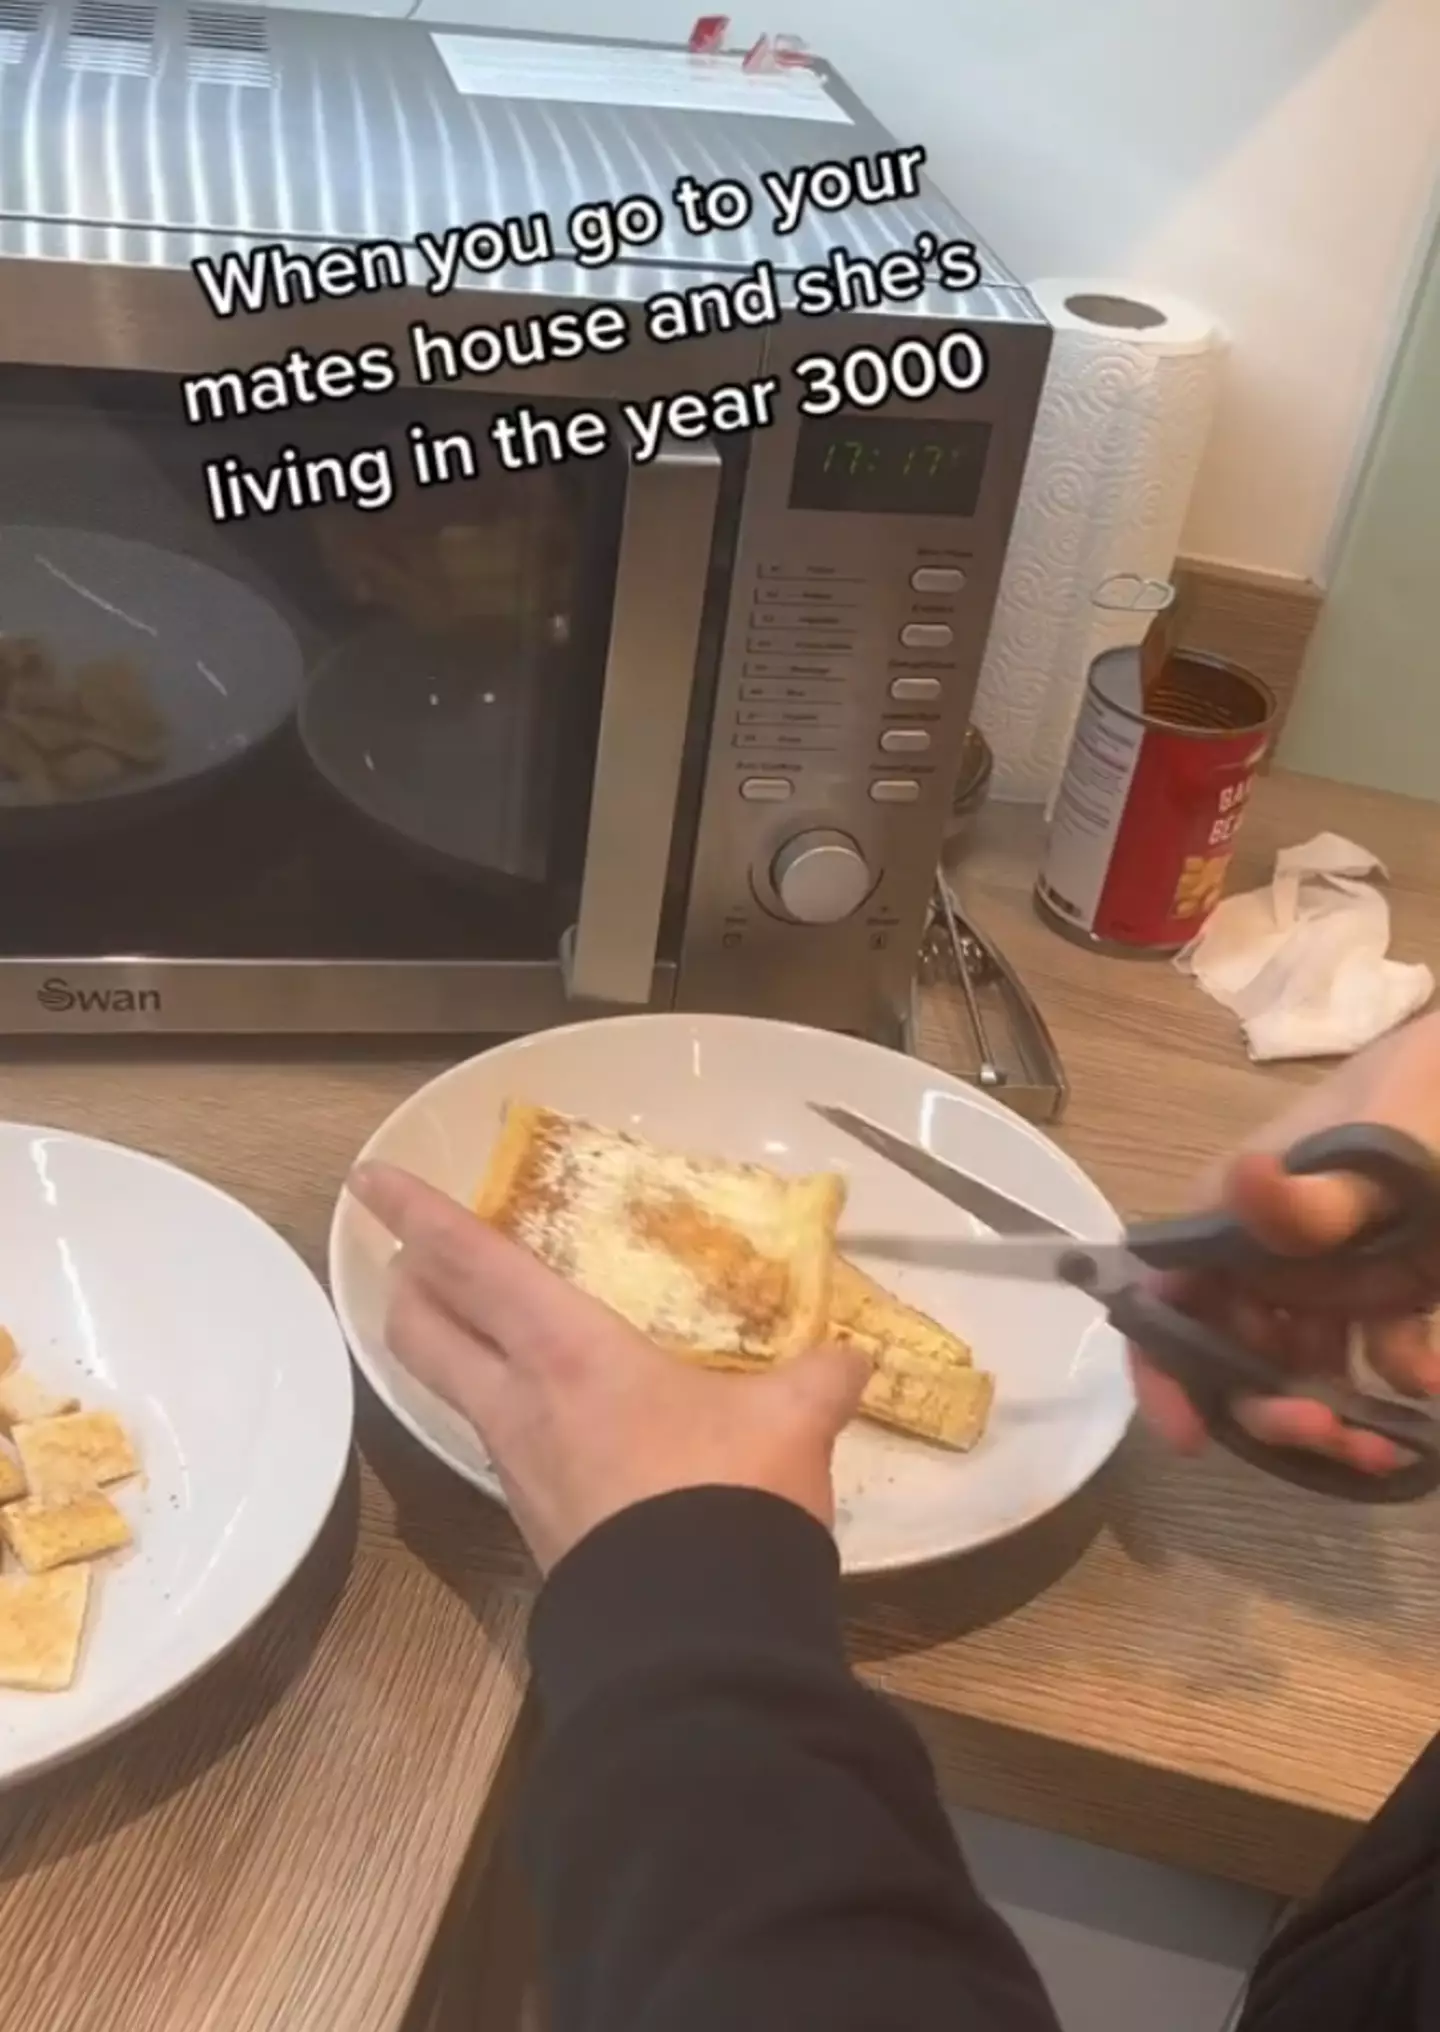 The unique hack sees the toast cut up into pieces before the beans are added.